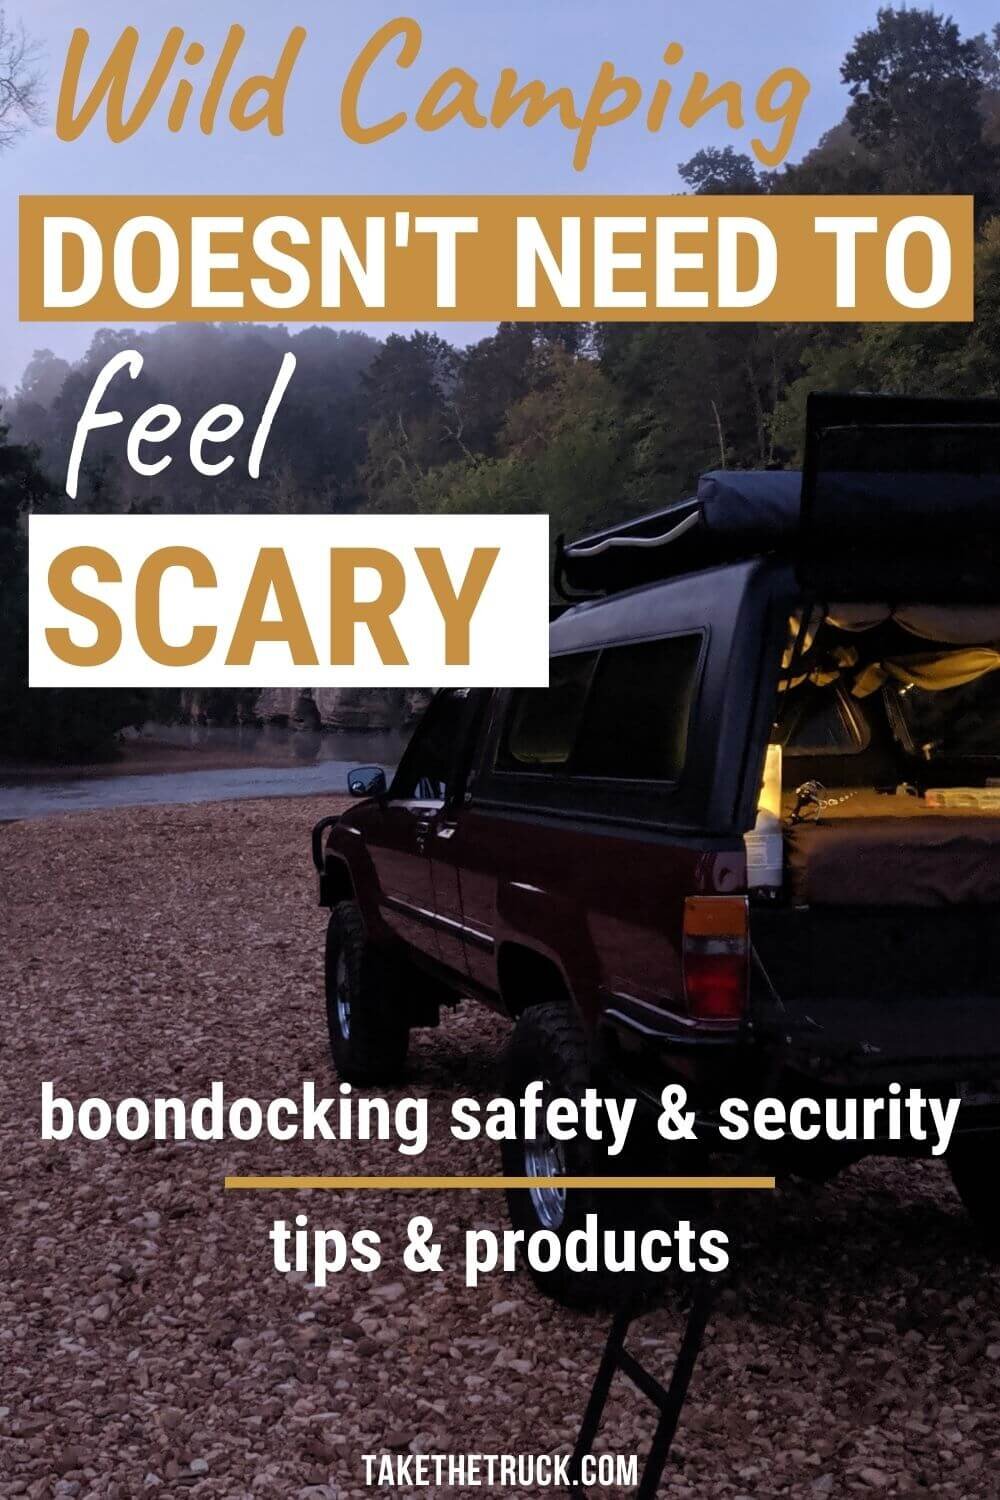 Is boondocking safe? This post is all about camp security and wild camping safety while boondocking. Lots of camping safety tips and ideas on feeling secure while camping off grid are given.